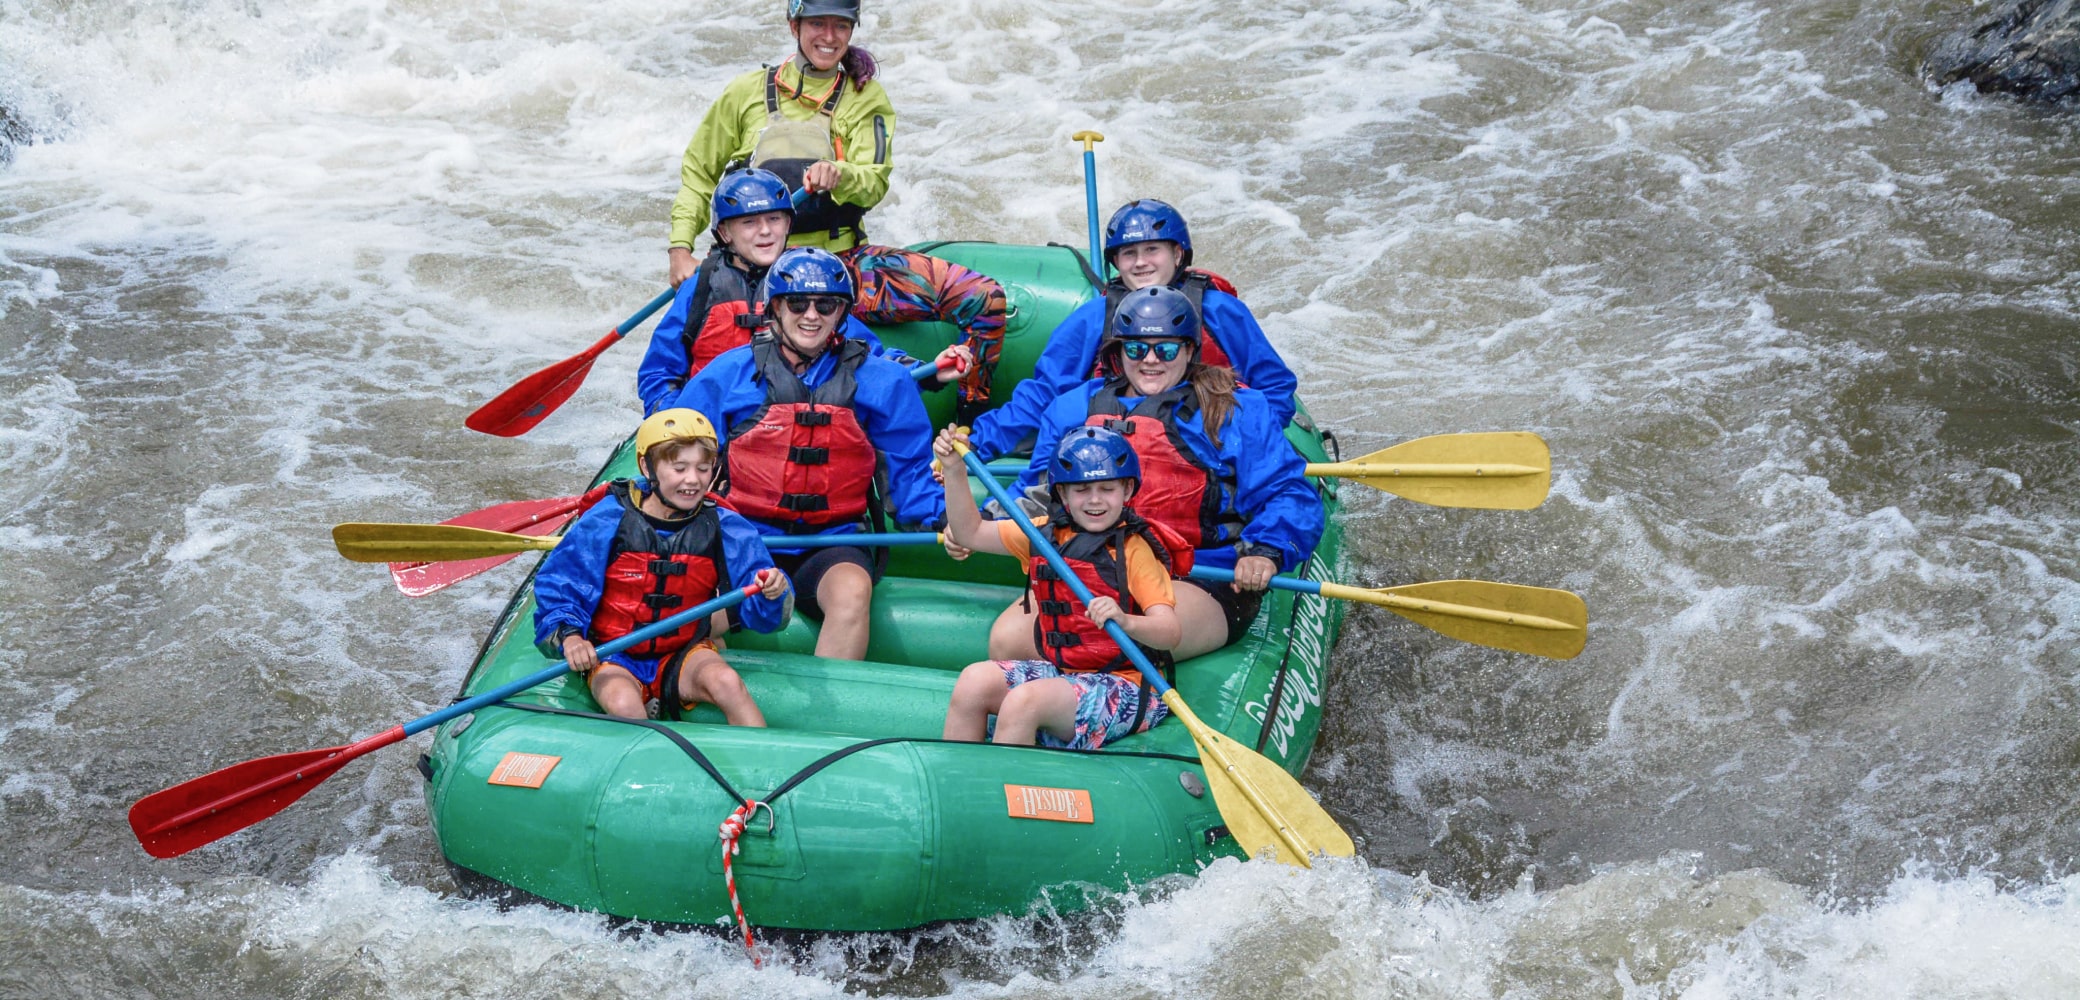 People navigating rapids while white water rafting for beginners